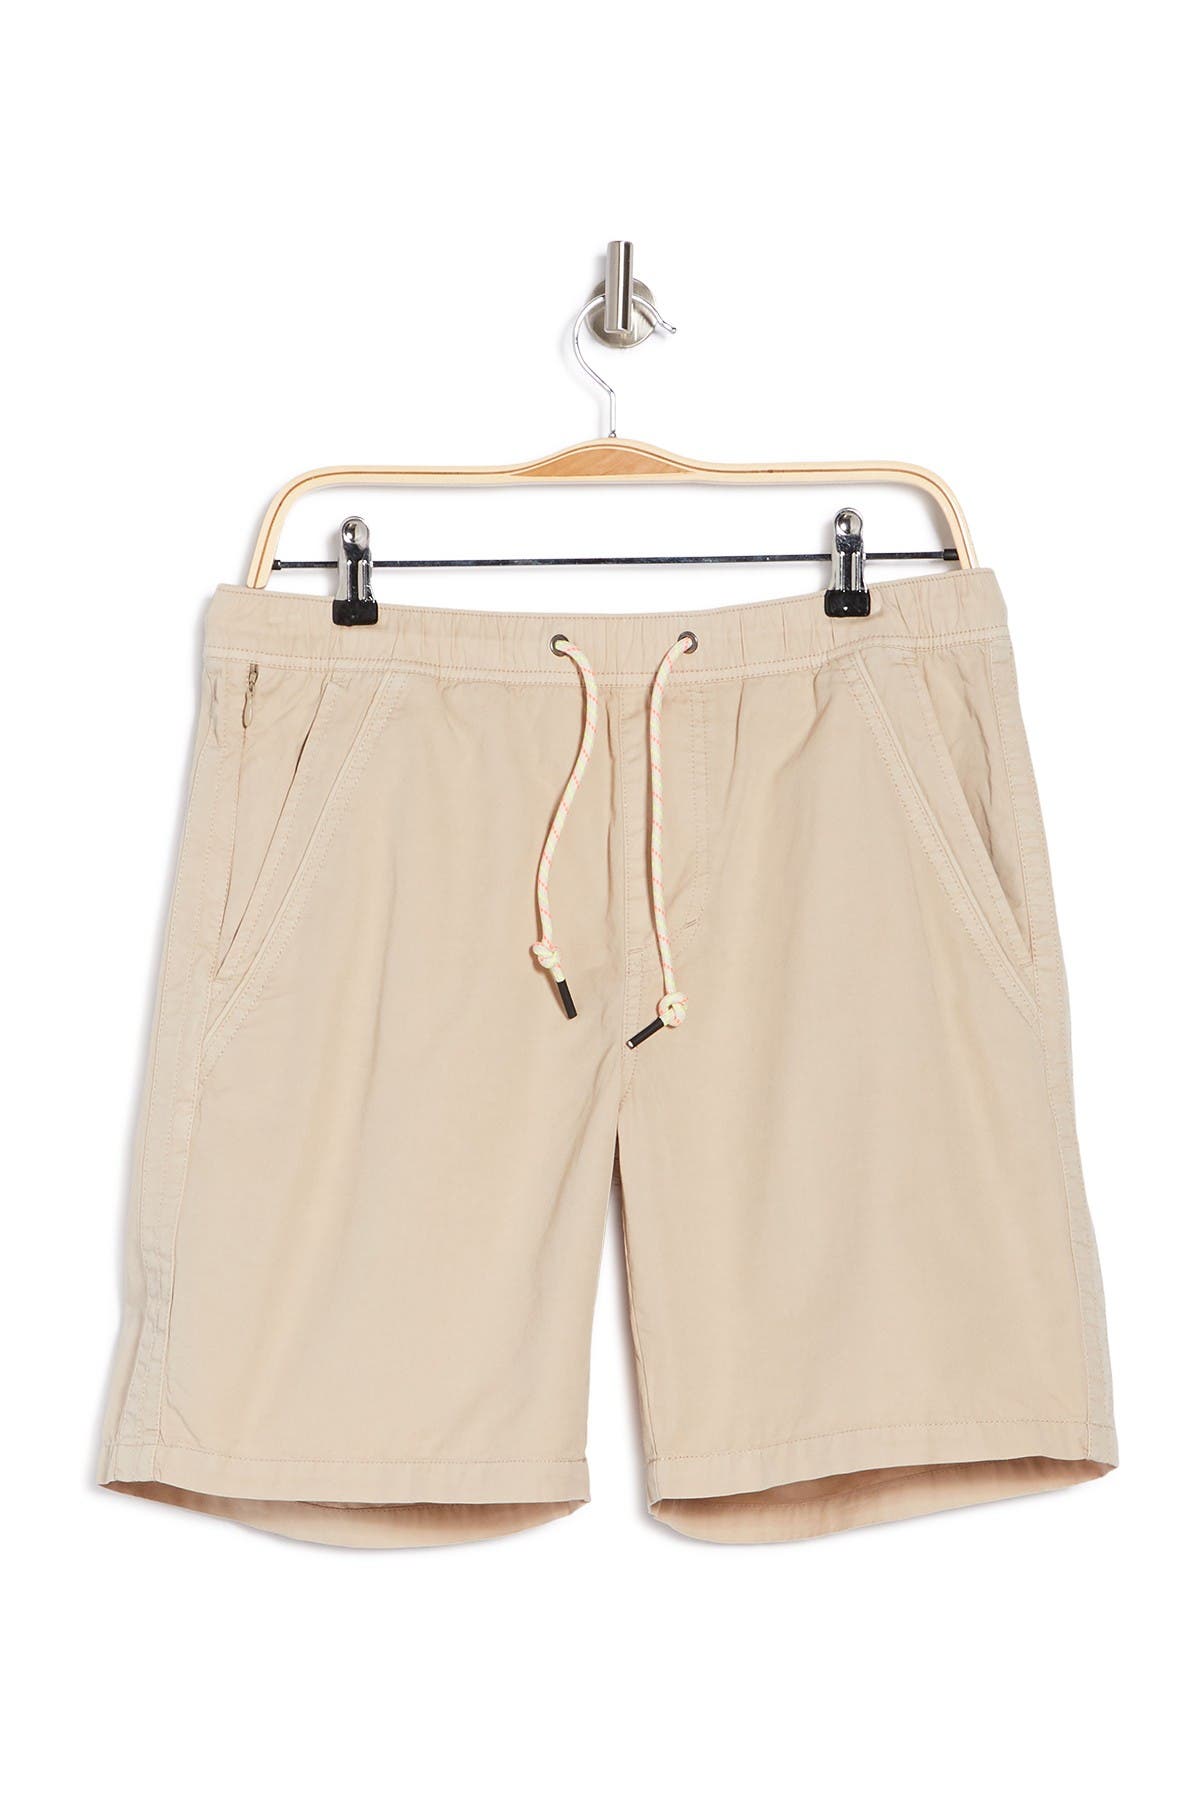 Union Denim Sun-sational Pull-on Woven Shorts In Sand